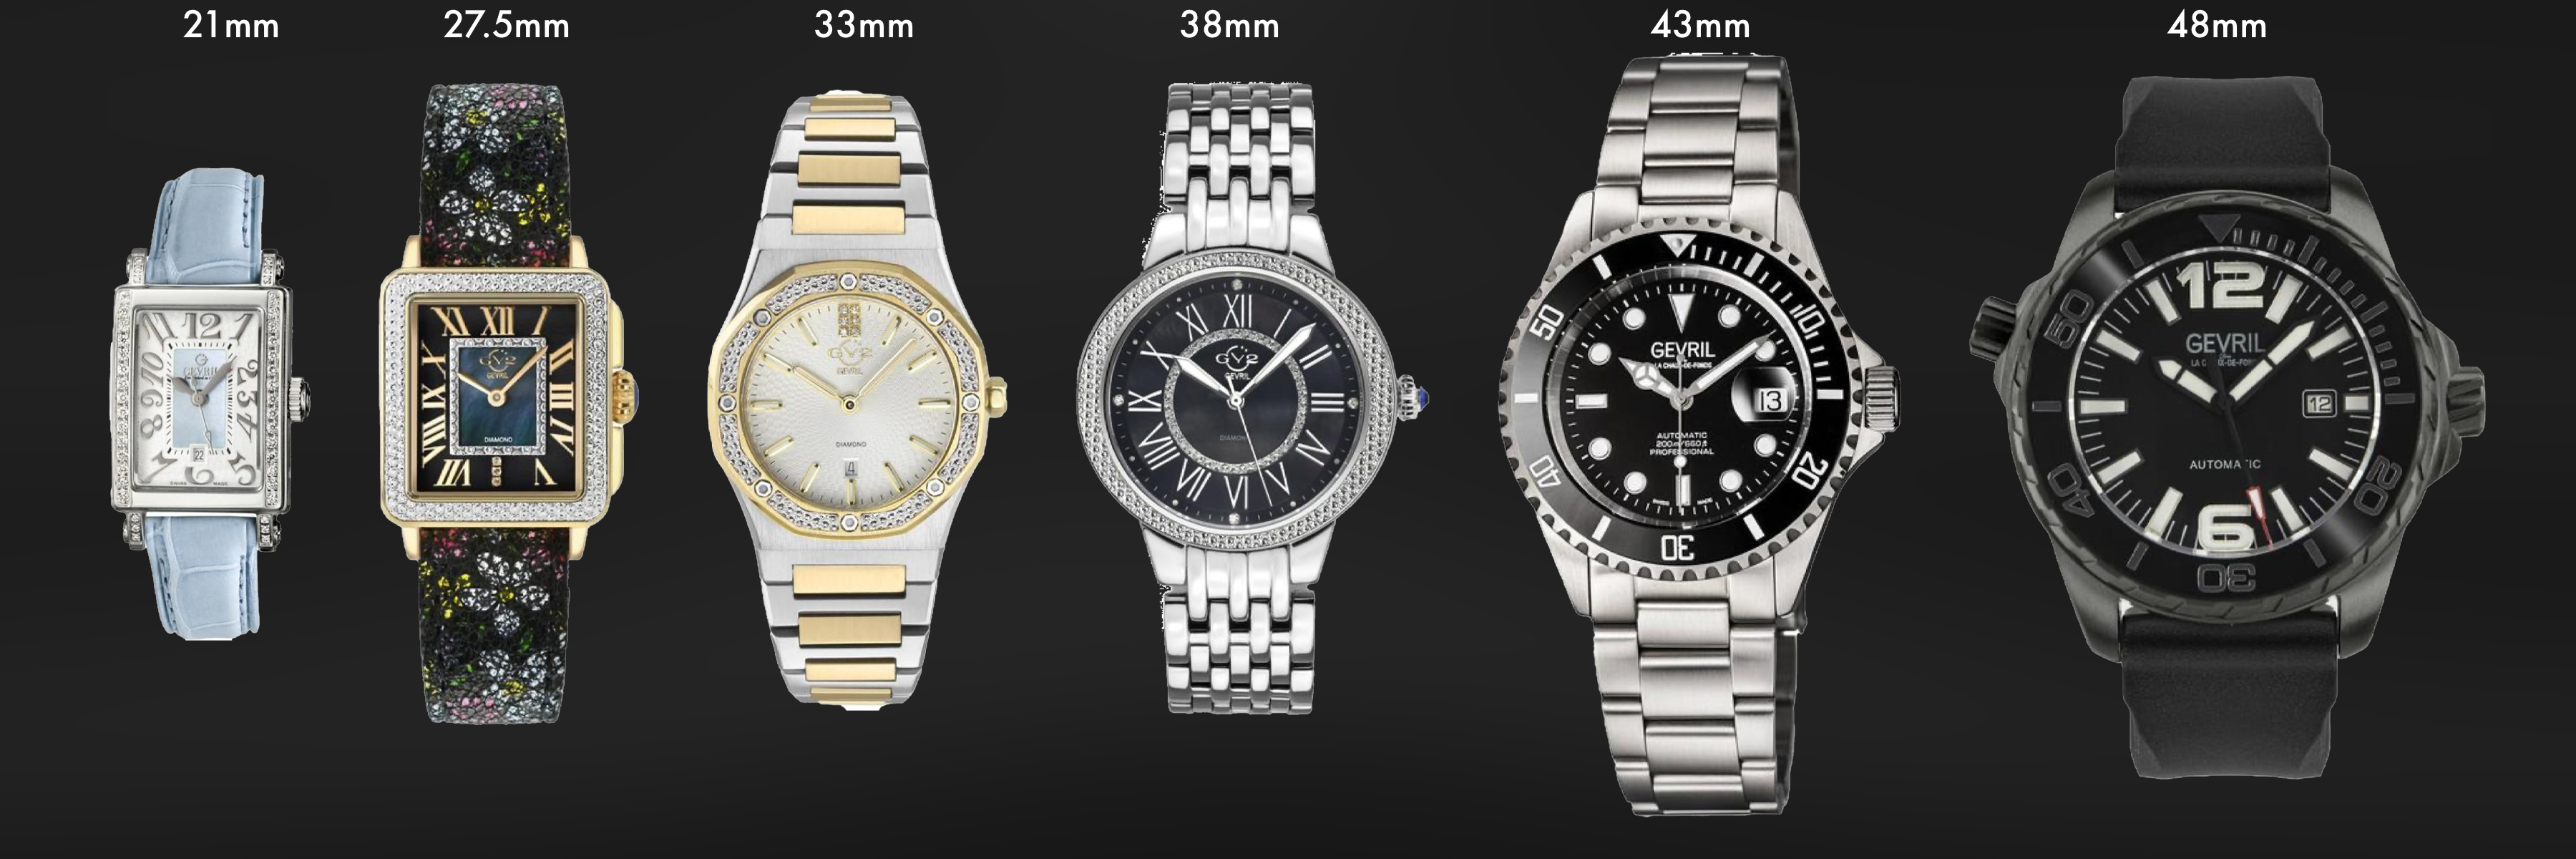 How to Choose the Right Size for Your Watch  Gevril